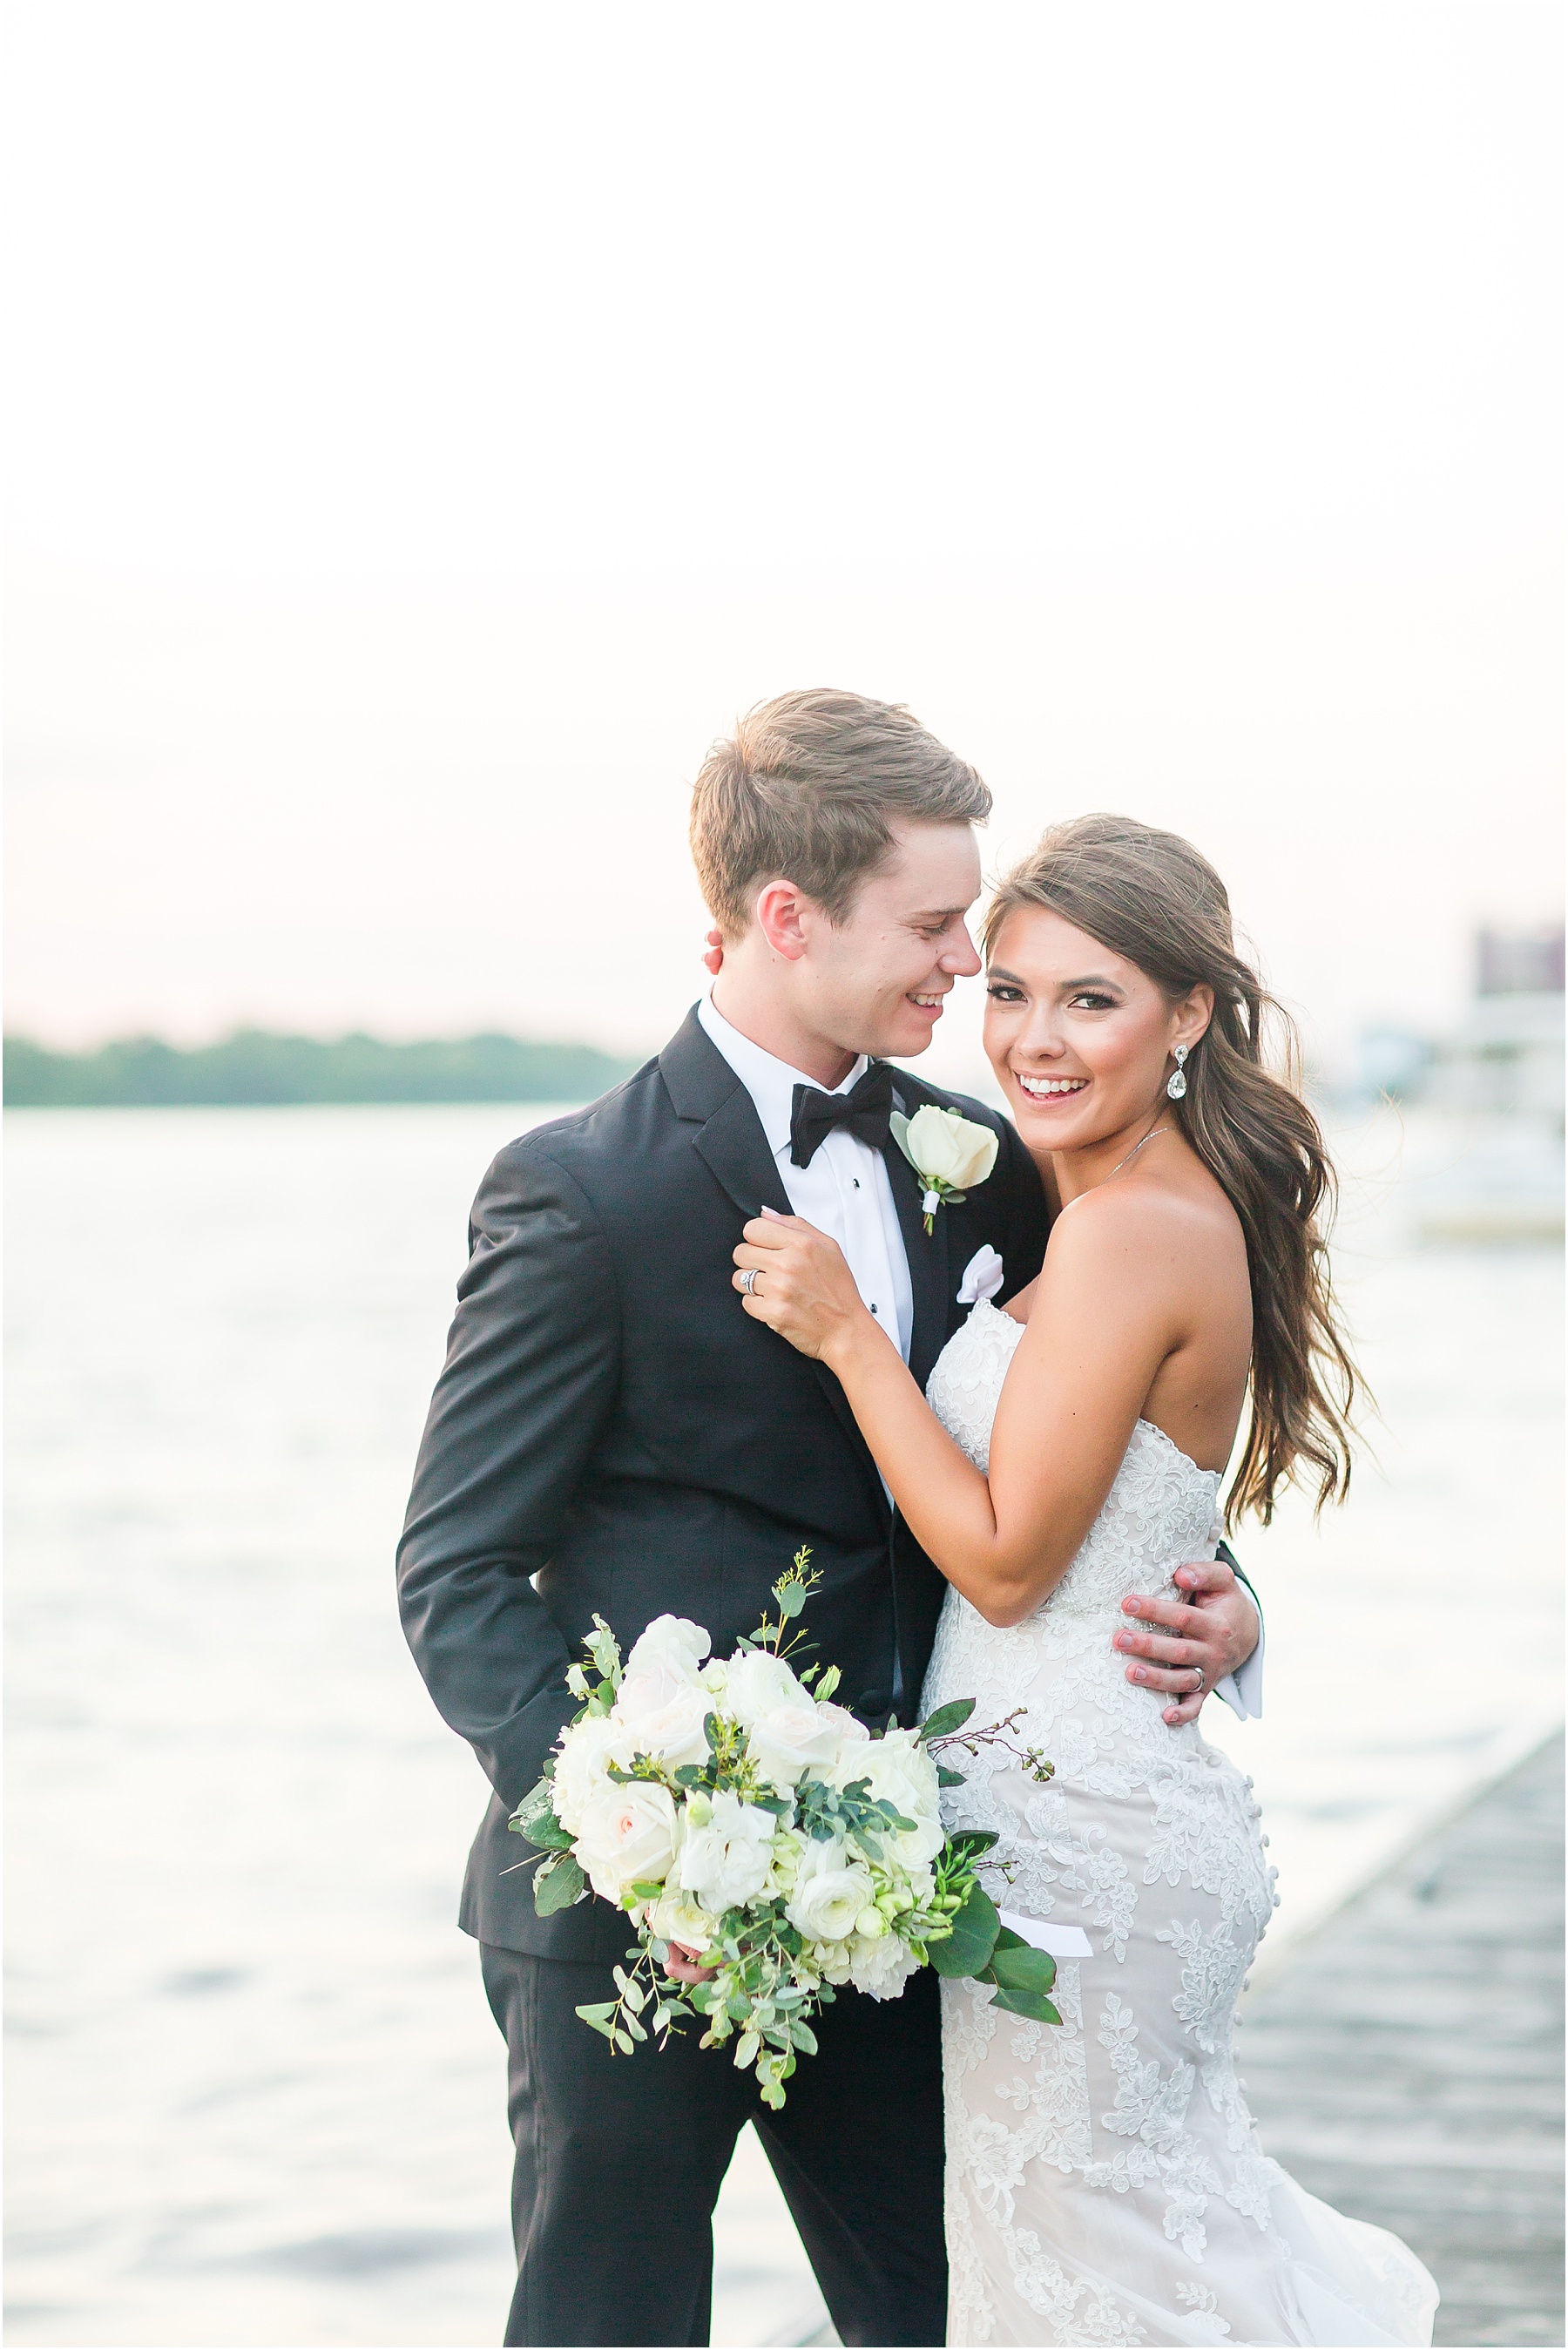 Bakery 105 and The Atrium Downtown Wilmington Wedding Bride and Groom Portraits